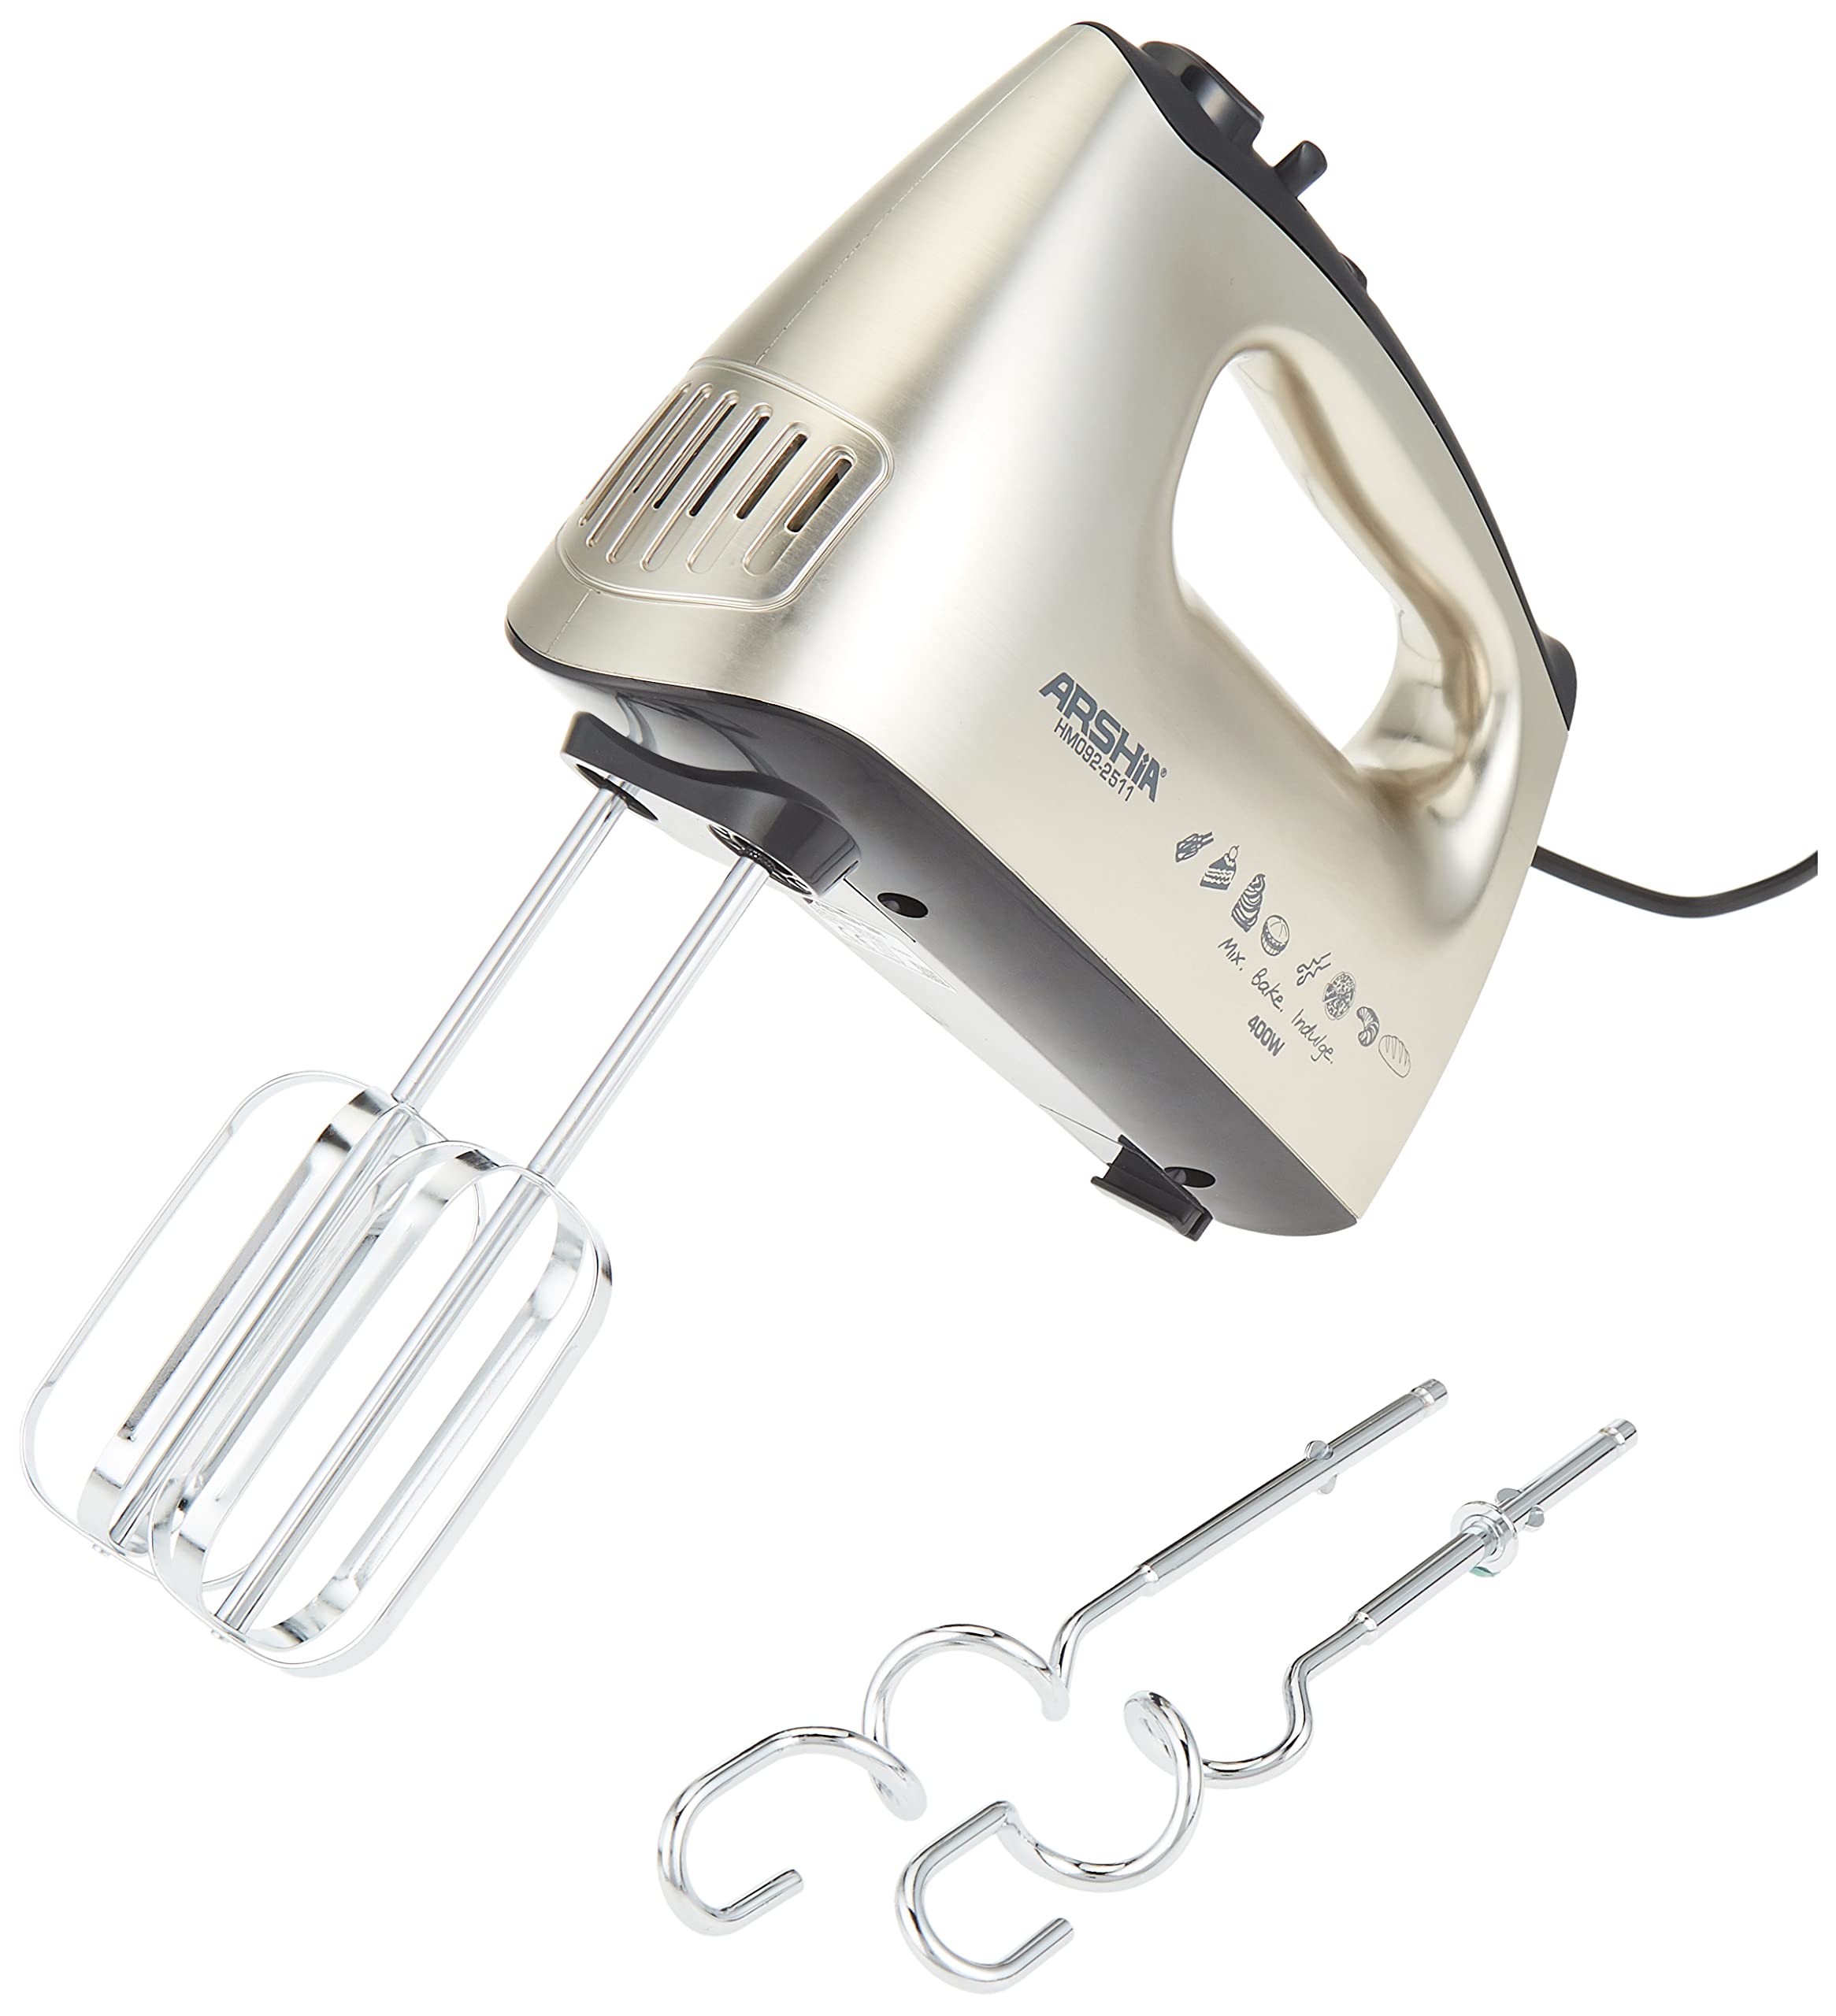 Arshia Hand Mixer 5 Speed and Turbo Function, 400W